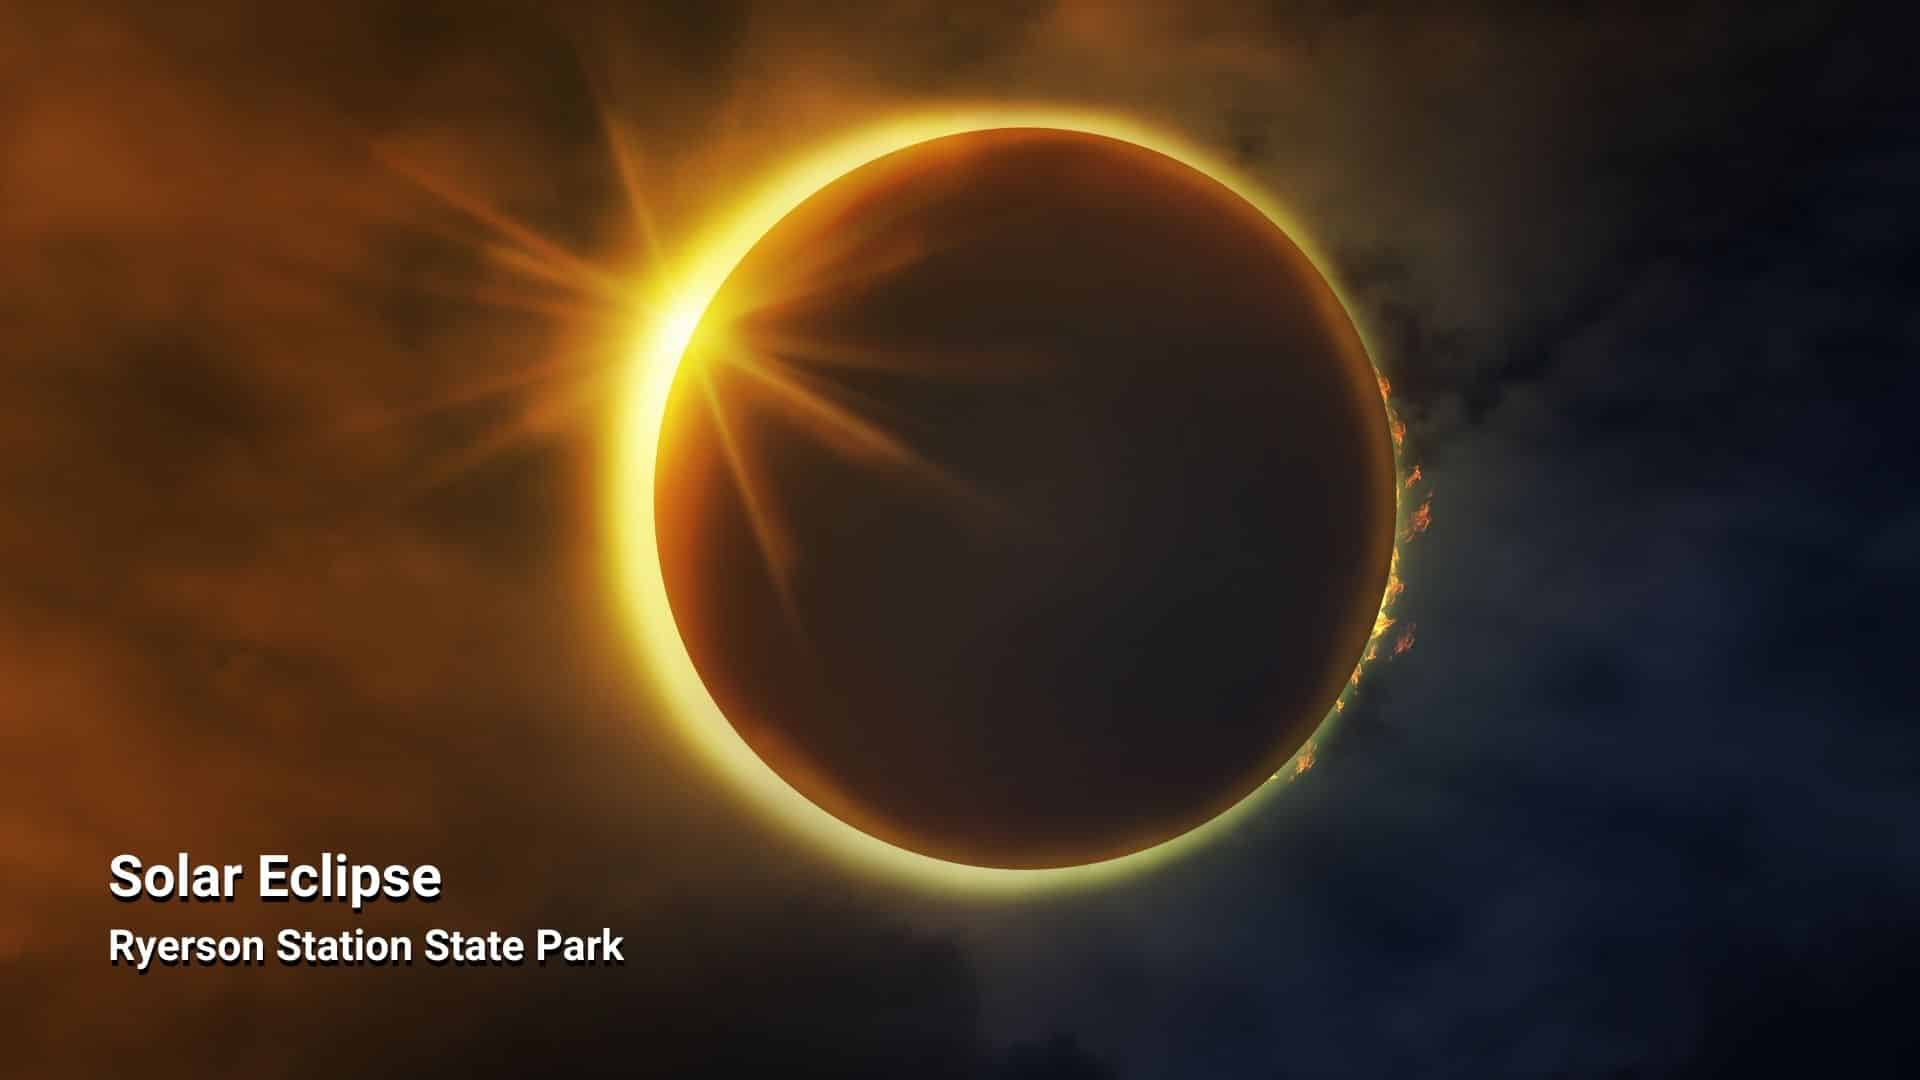 Photograph of a partial solar eclipse with a sun glare around a silhouette of the moon. White text says Solar Eclipse Ryerson Station State Park